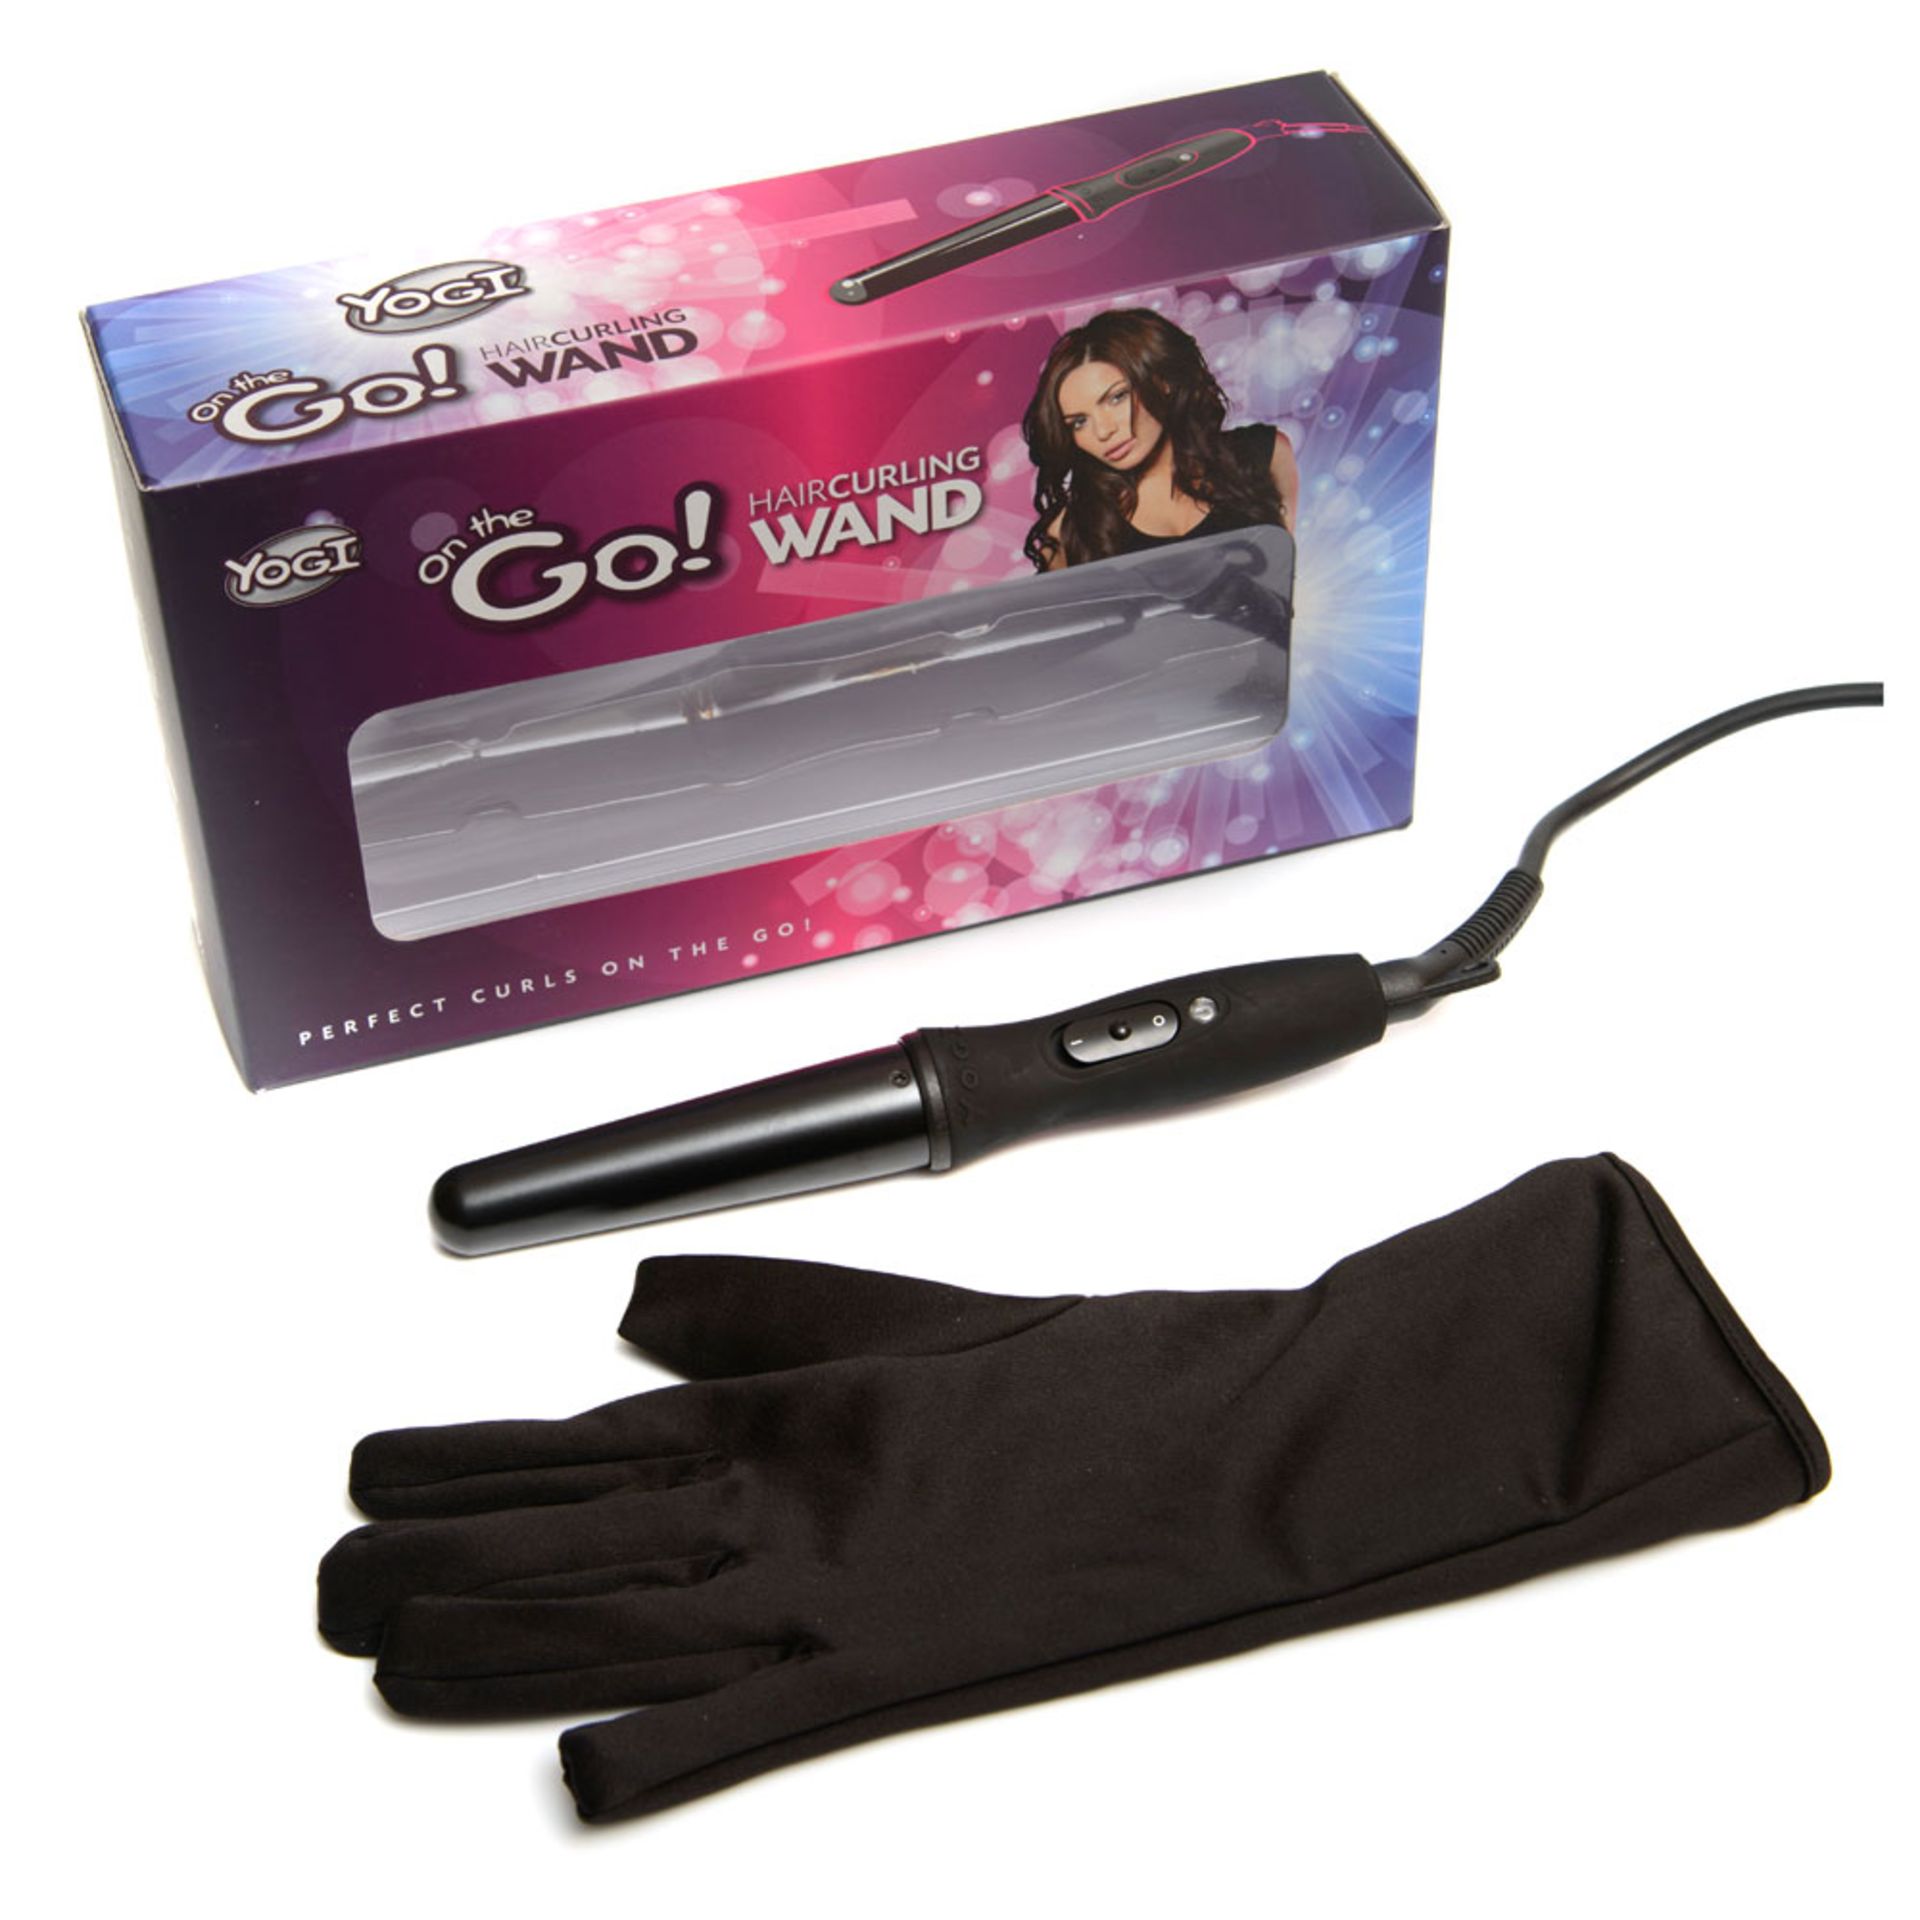 V *TRADE QTY* Brand New Yogi On-The-Go! Hair Curling Wand With Safety Glove - Tourmaline & Ceramic